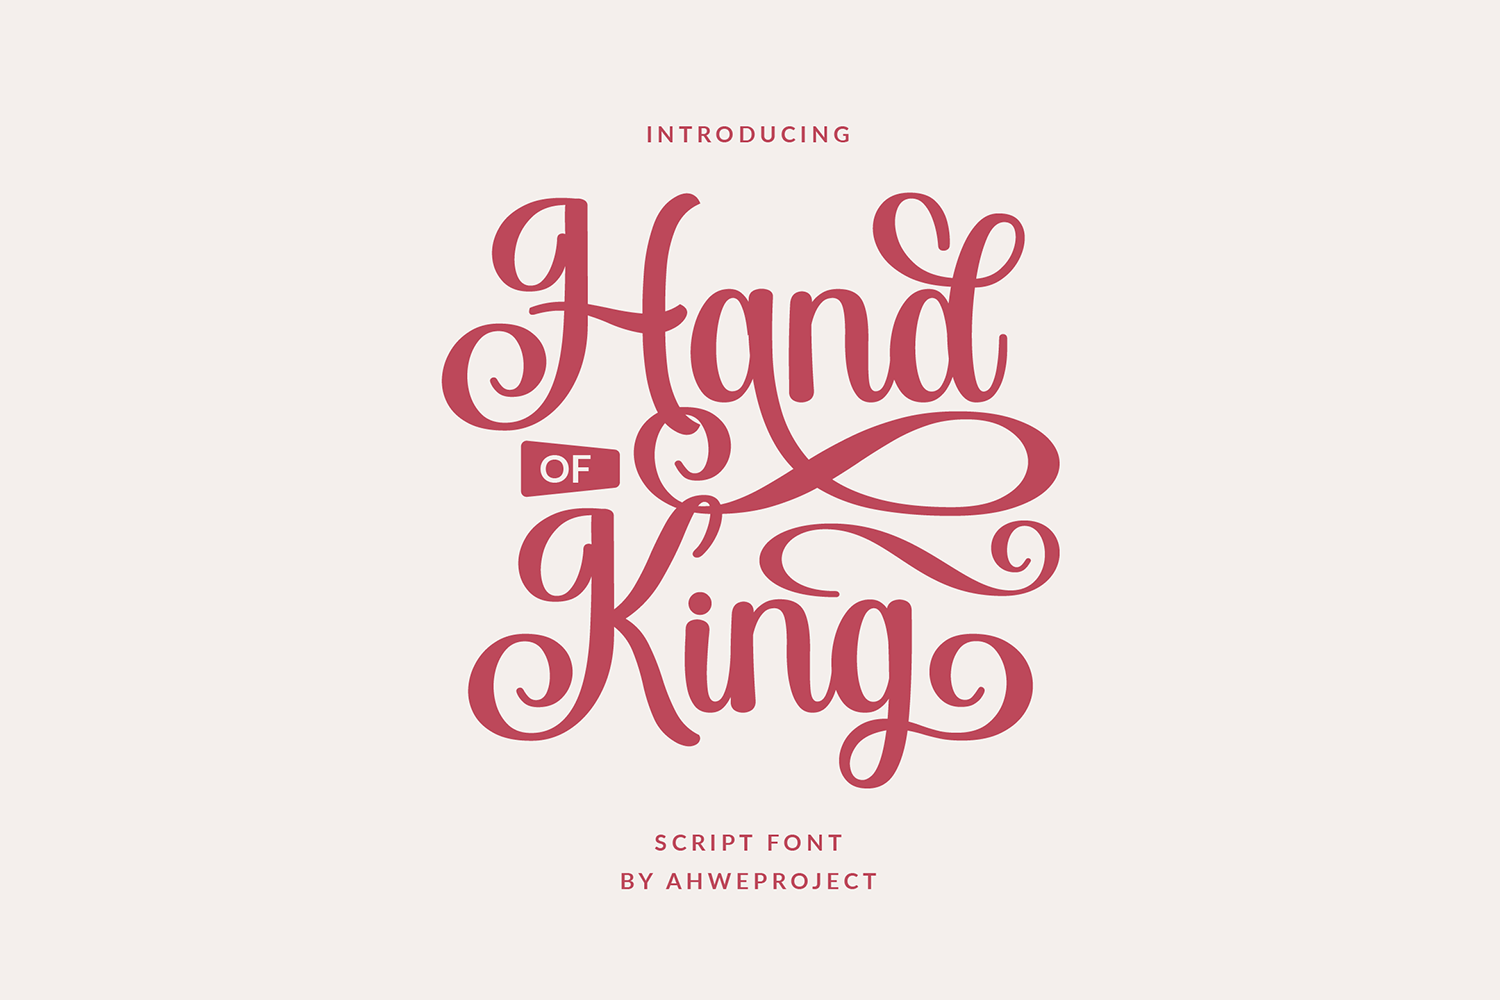 Hand of King